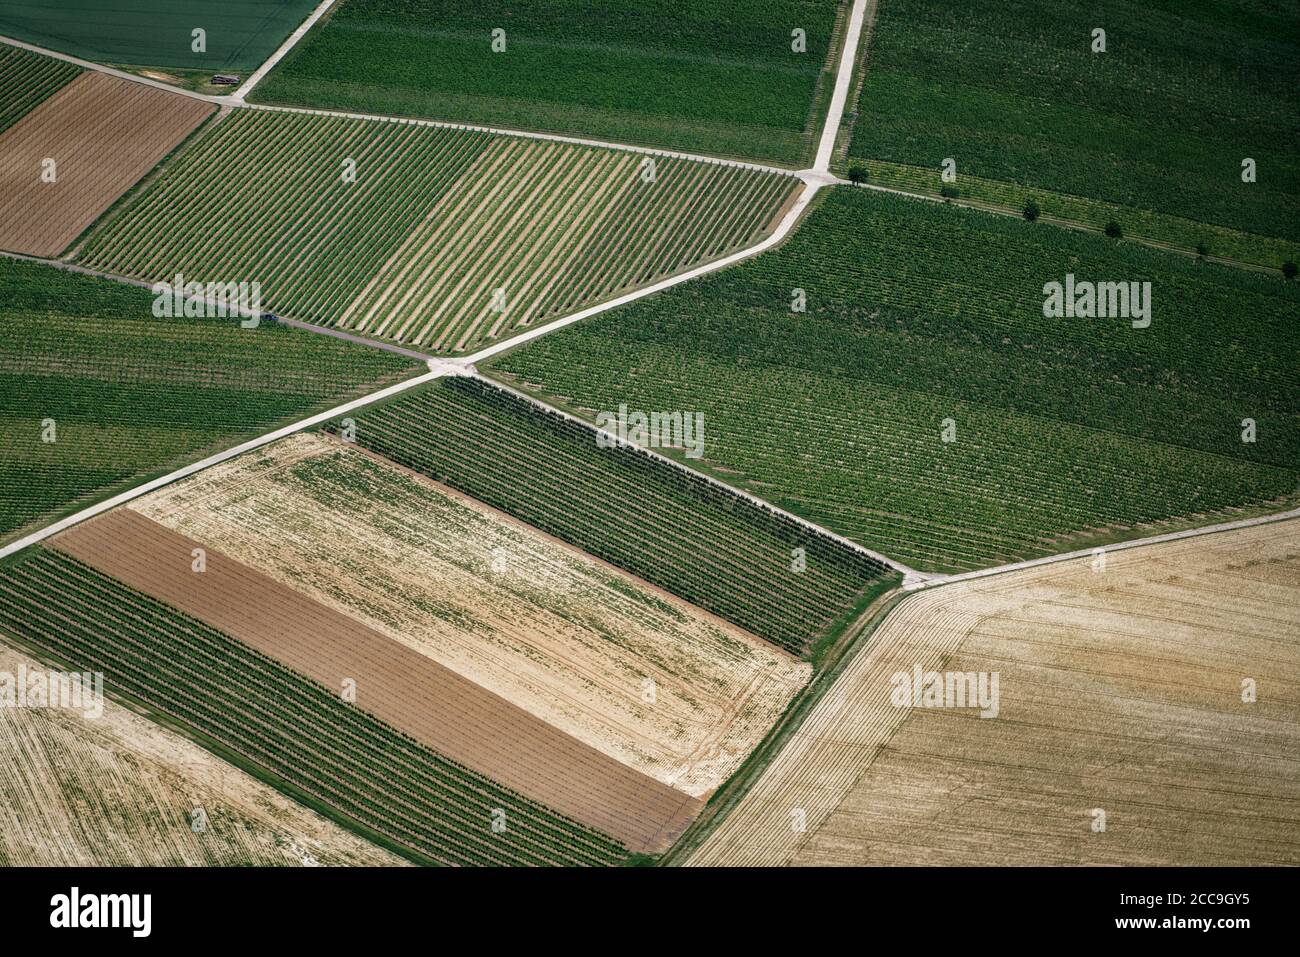 The Rhine Valley is used in many ways by agriculture: many vine yards but also corn fields. This aerial looks very abstract. Stock Photo